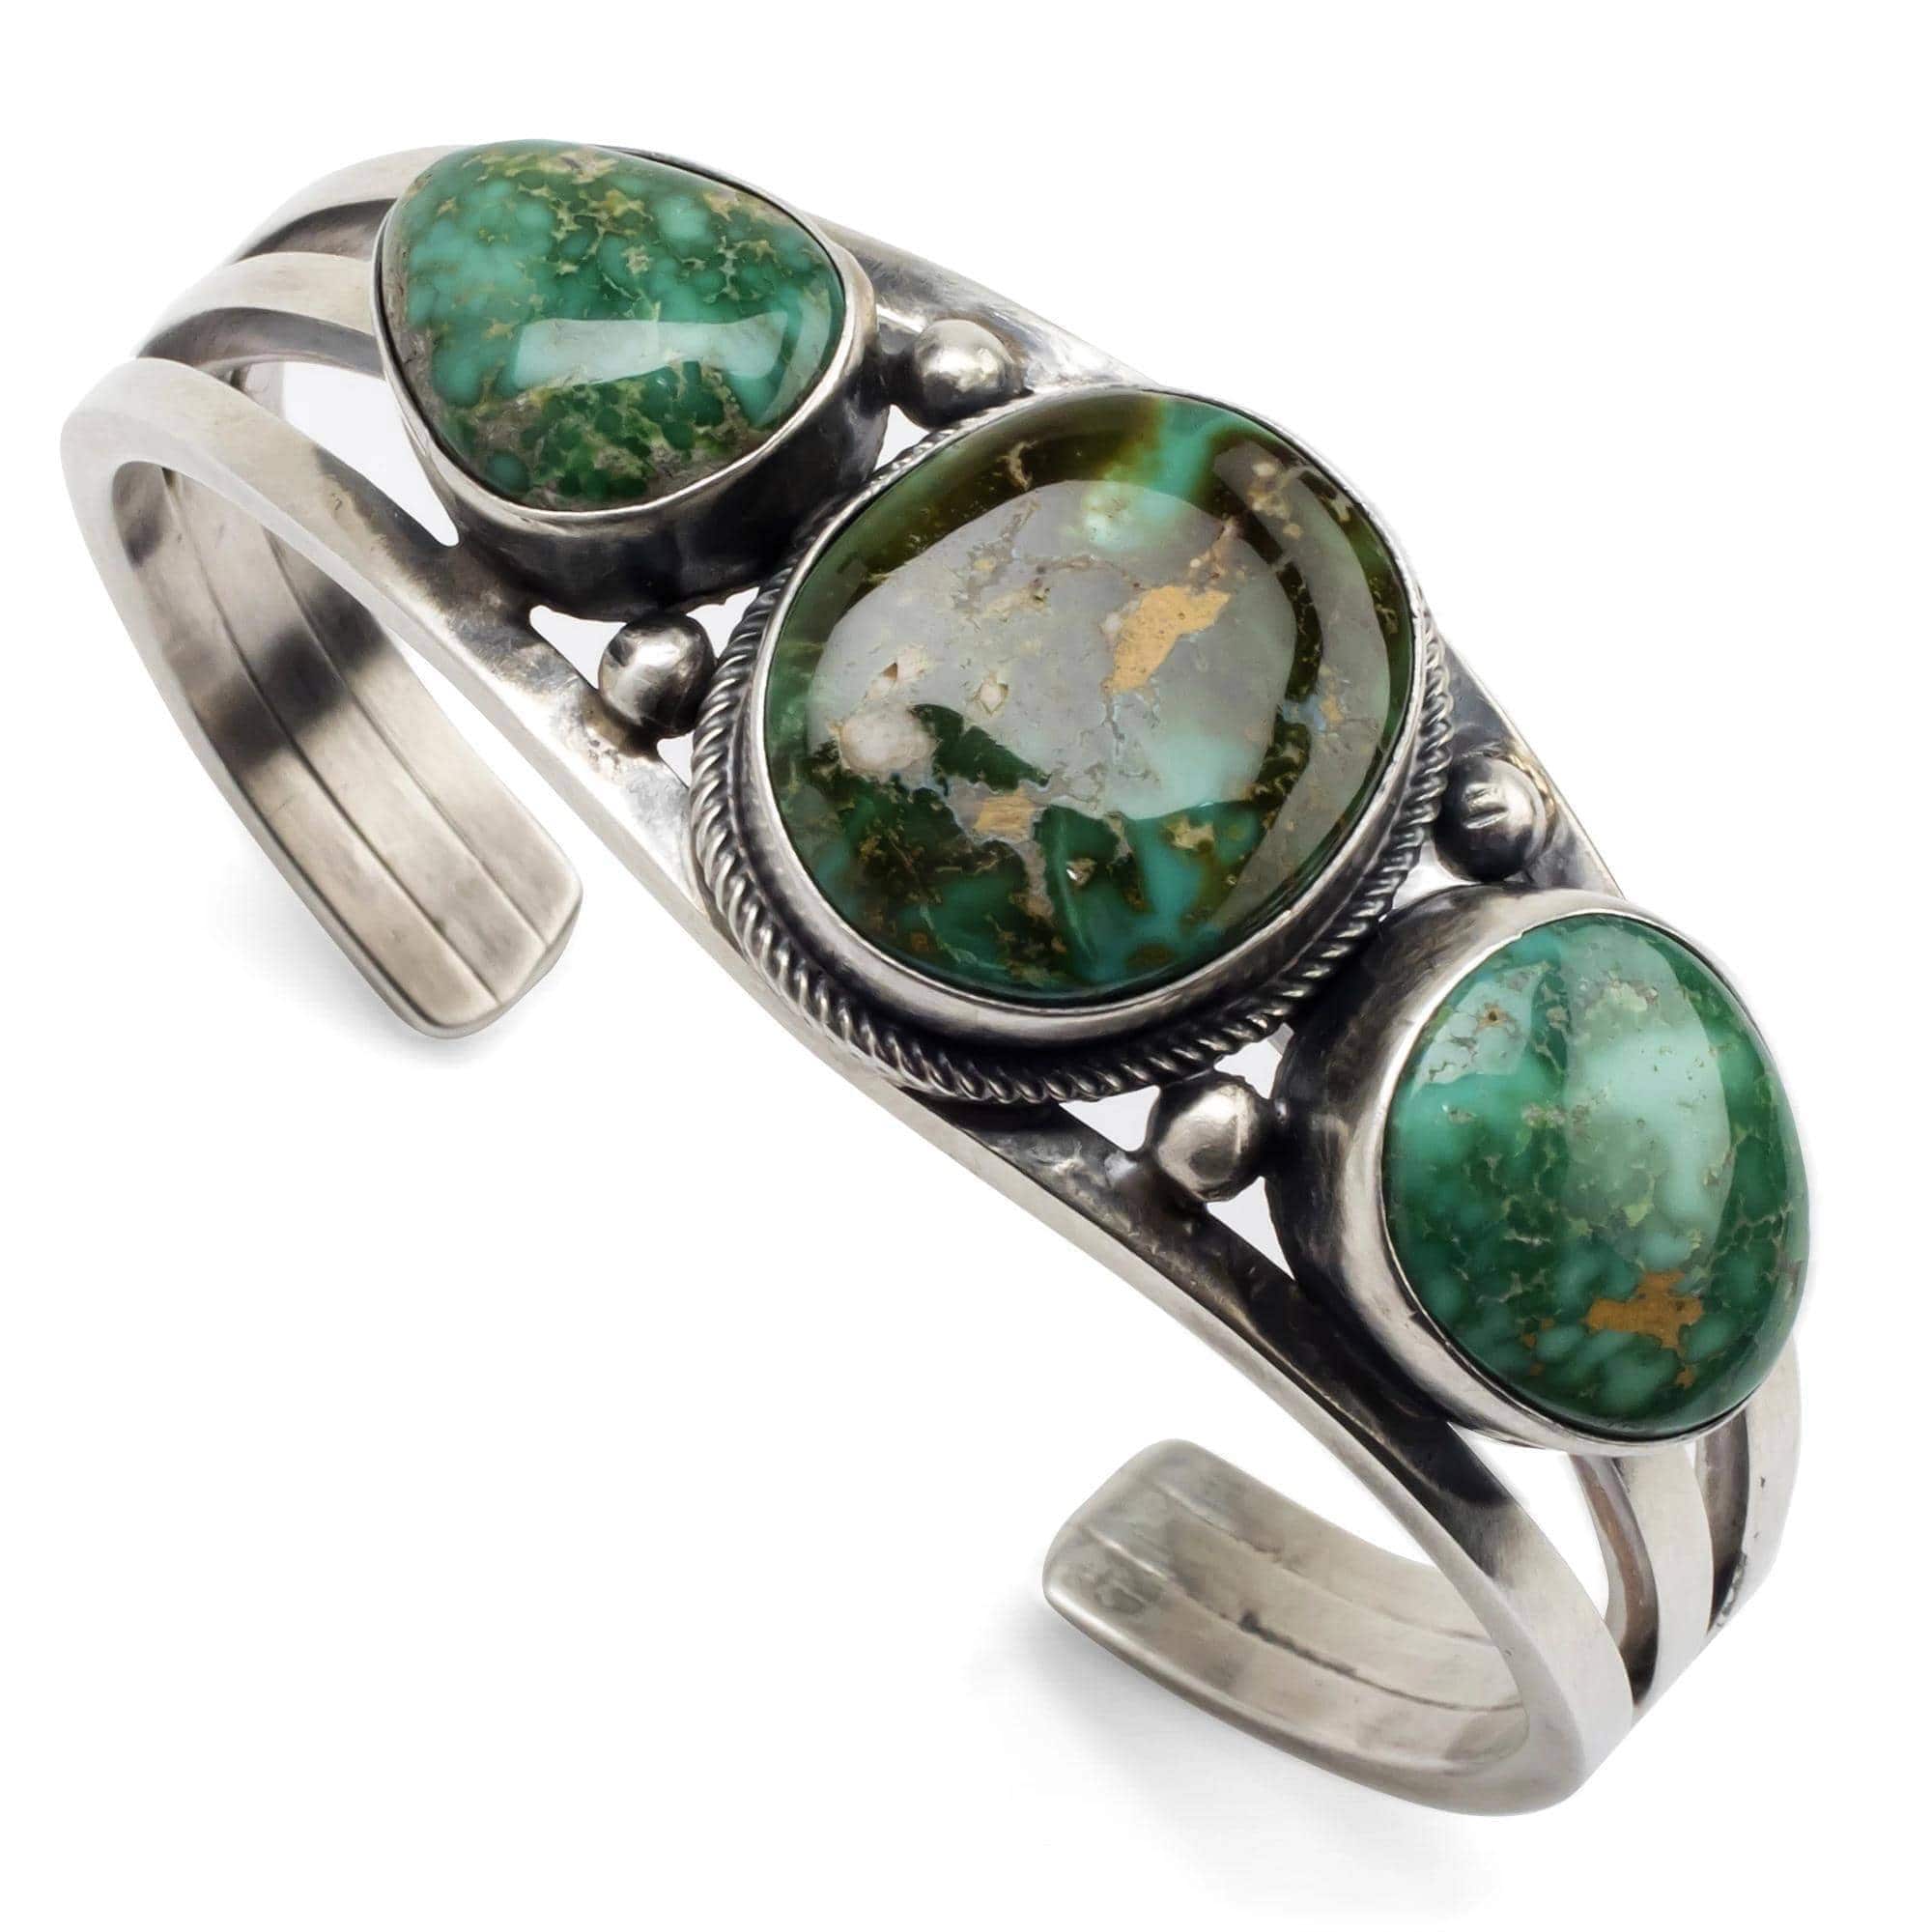 Kalifano Native American Jewelry Royston Turquoise USA Native American Made 925 Sterling Silver Cuff NAB3100.001